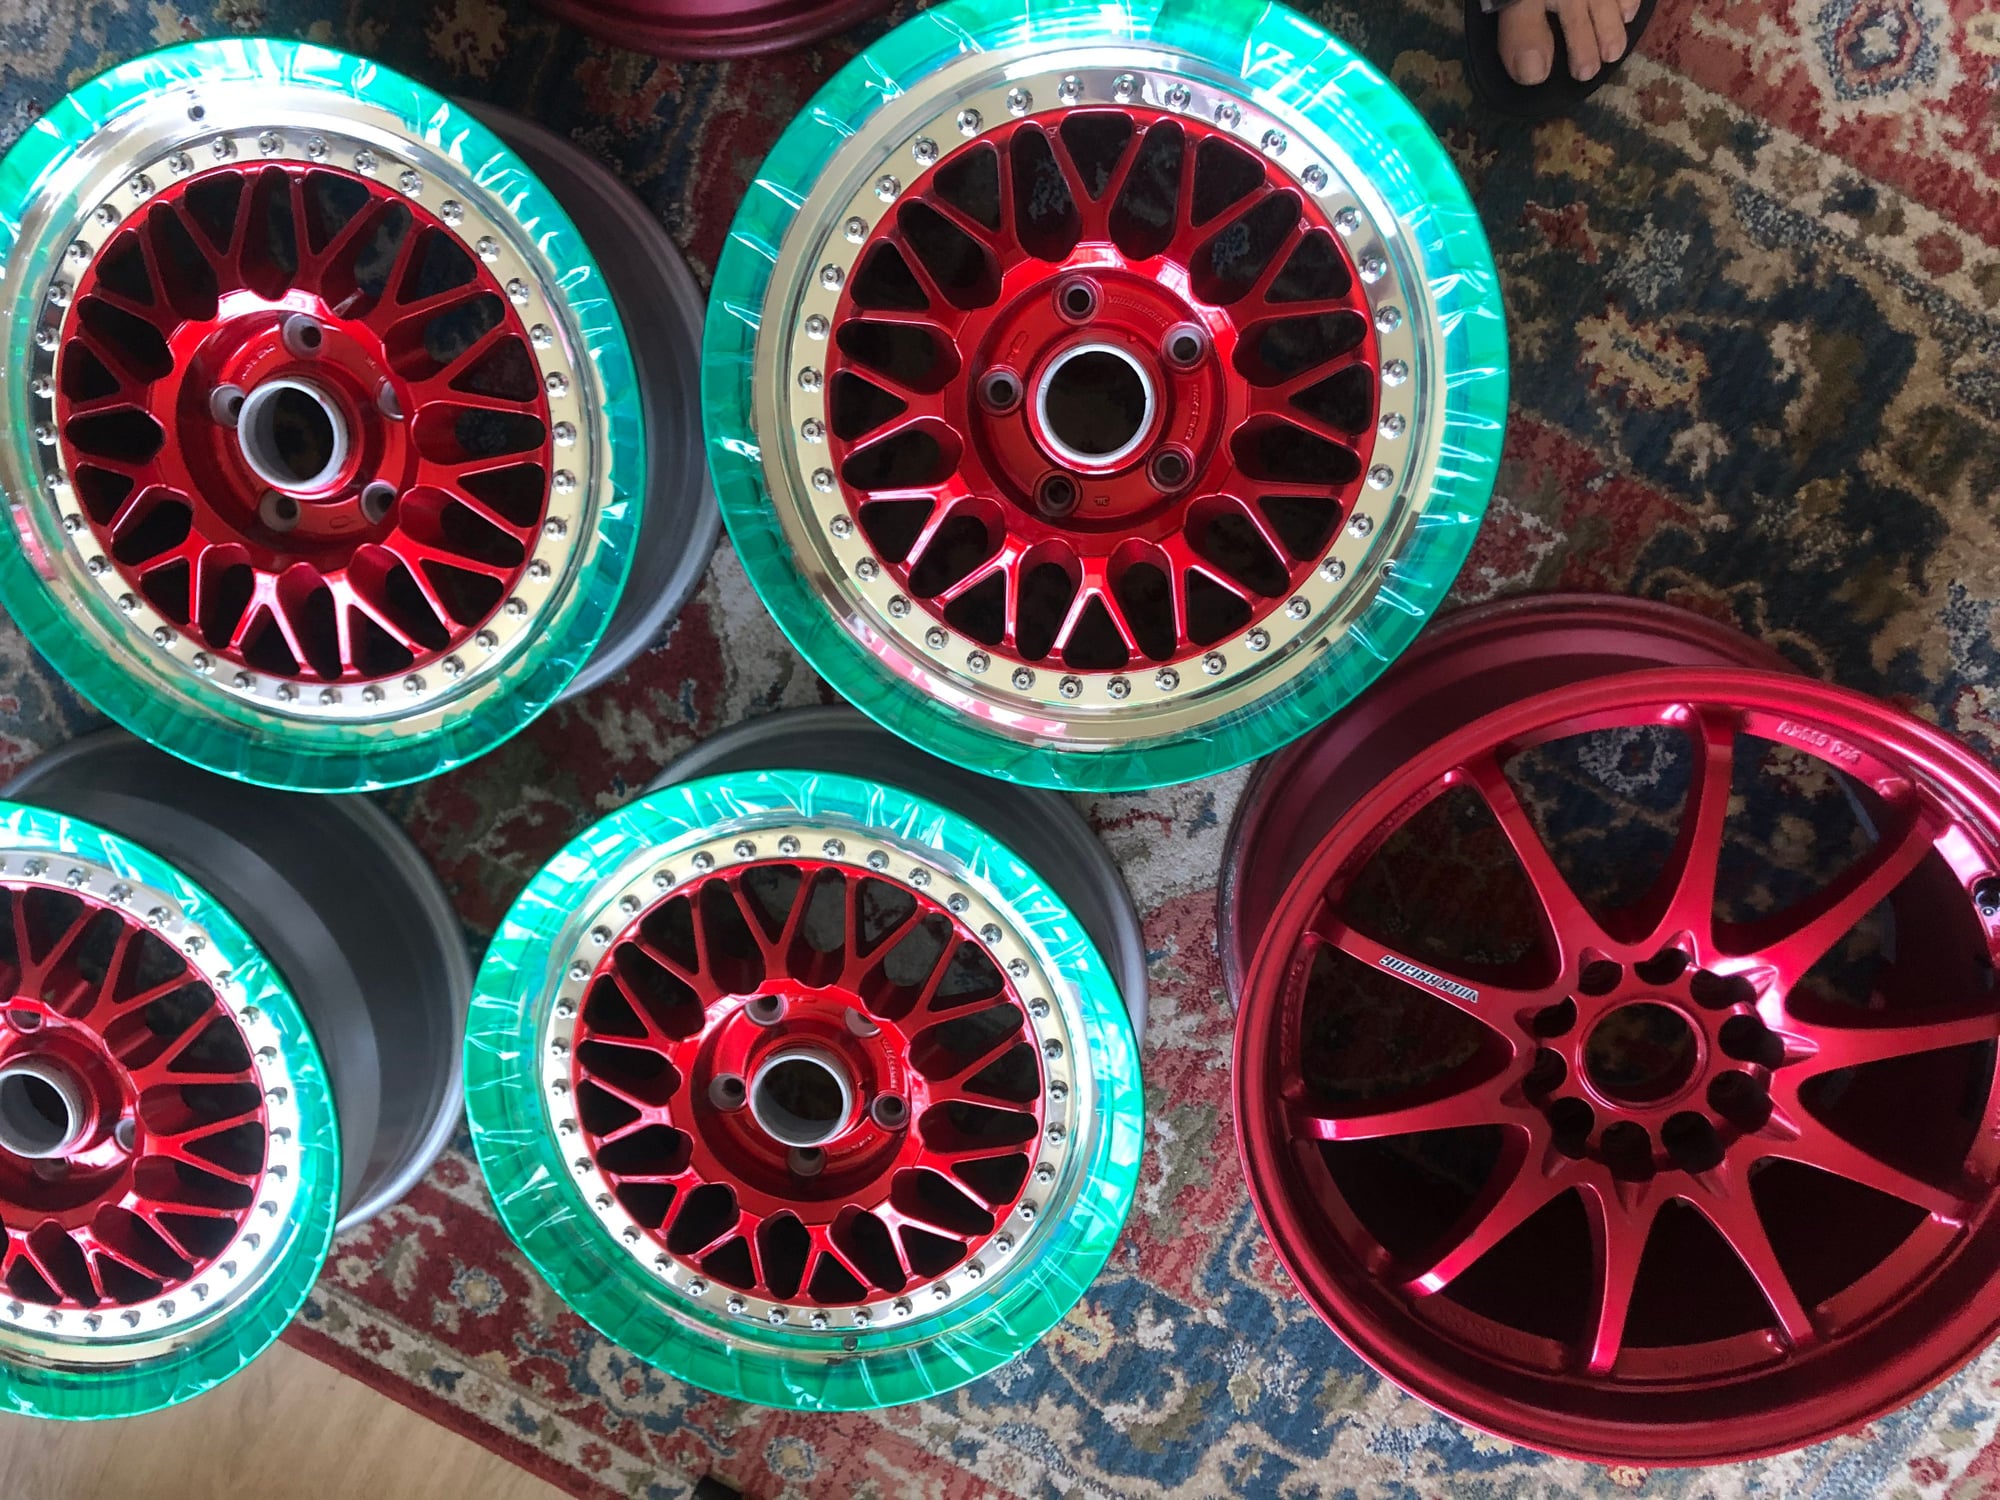 Wheels and Tires/Axles - Volk Racing Evo2 Group A 5x114.3 - New - 0  All Models - San Mateo, CA 94402, United States